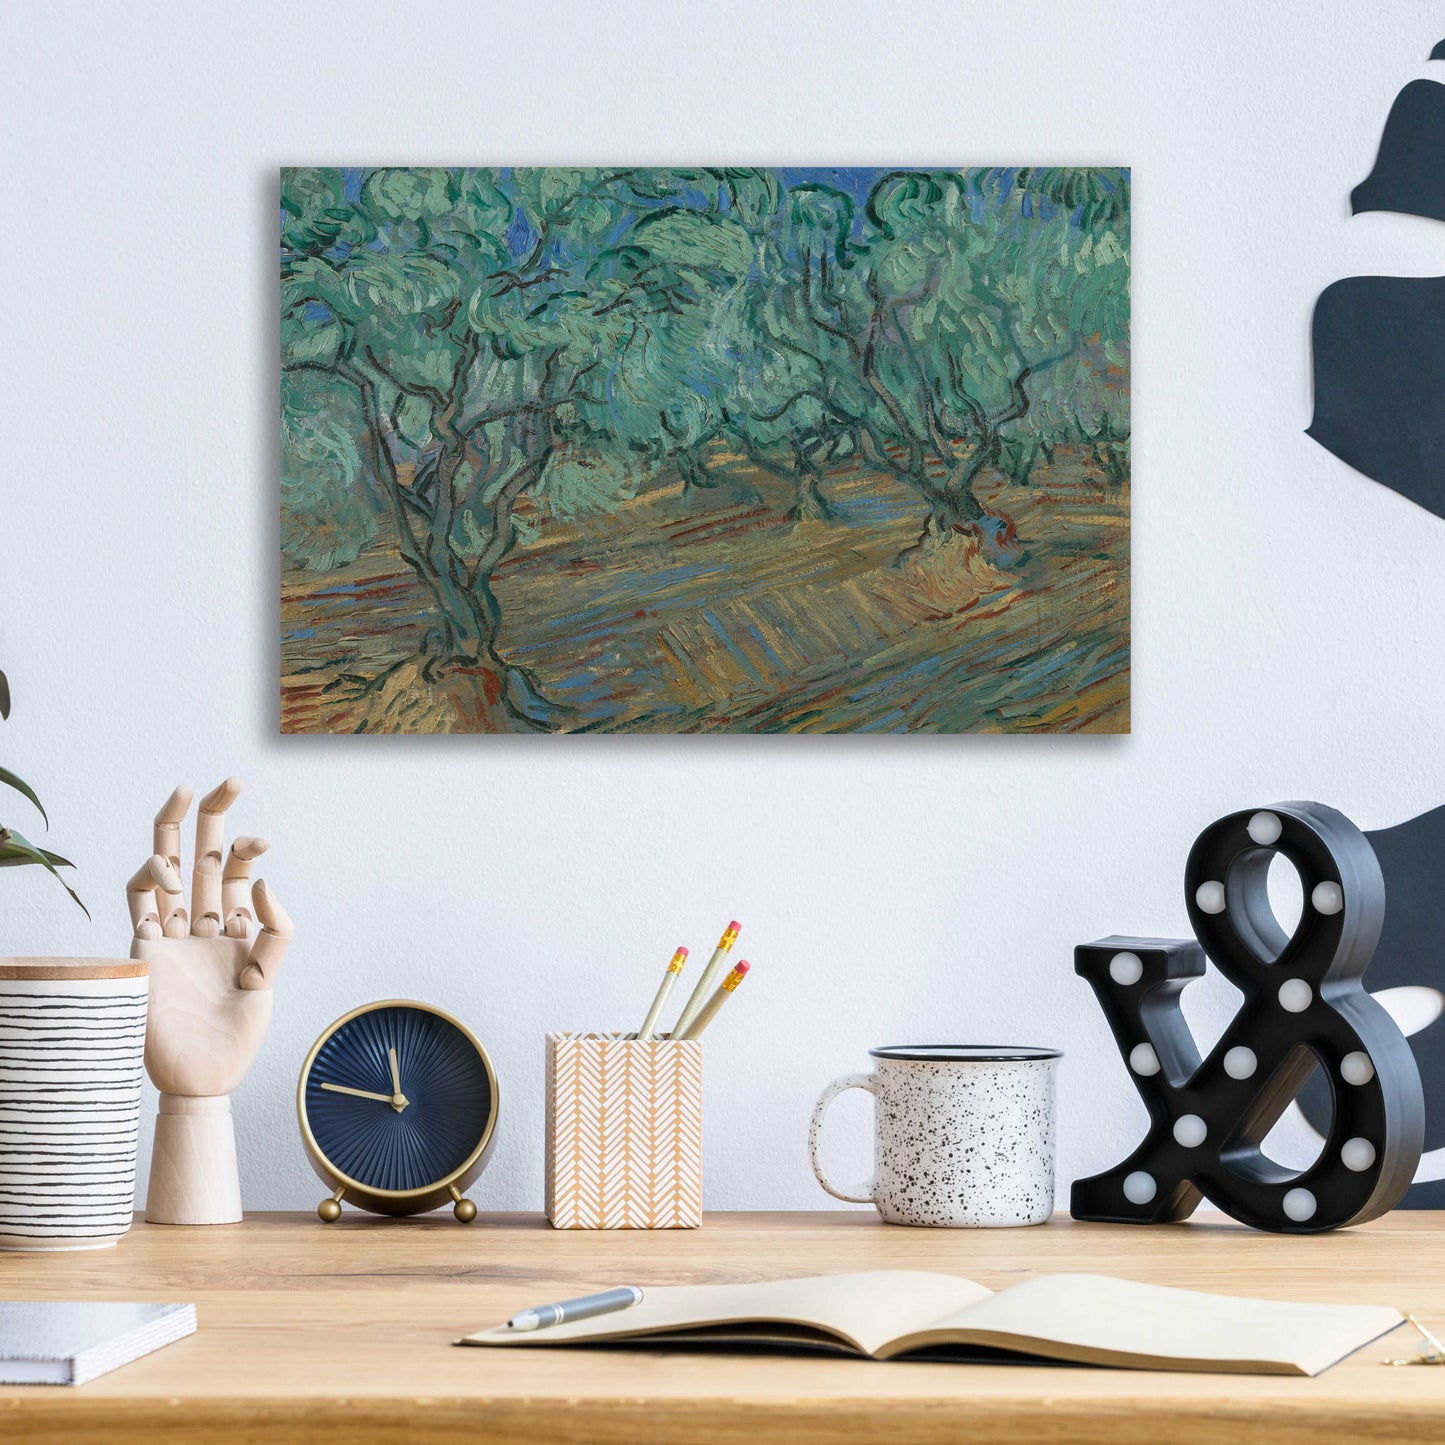 Epic Art 'Olive Grove' by Vincent Van Gogh, Acrylic Glass Wall Art,16x12